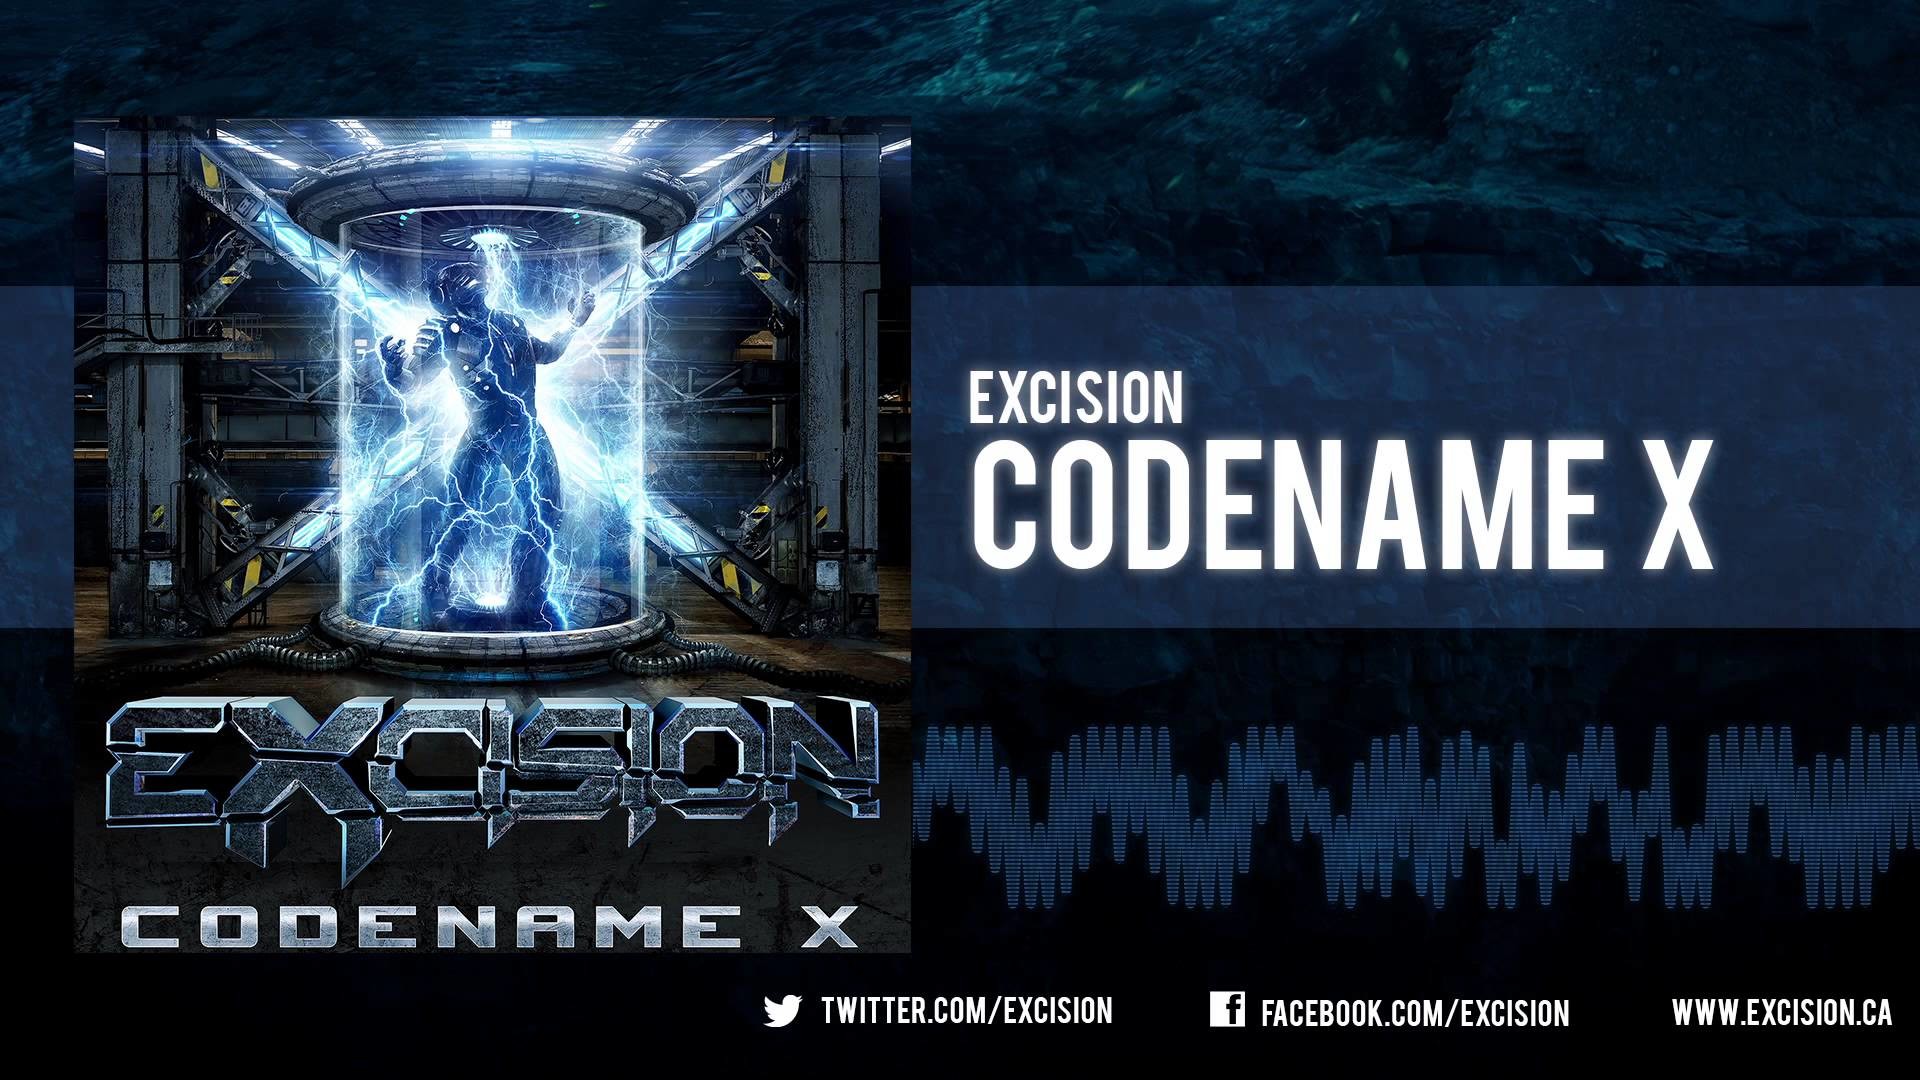 1920x1080 Excision - "Codename X" [Official Upload]